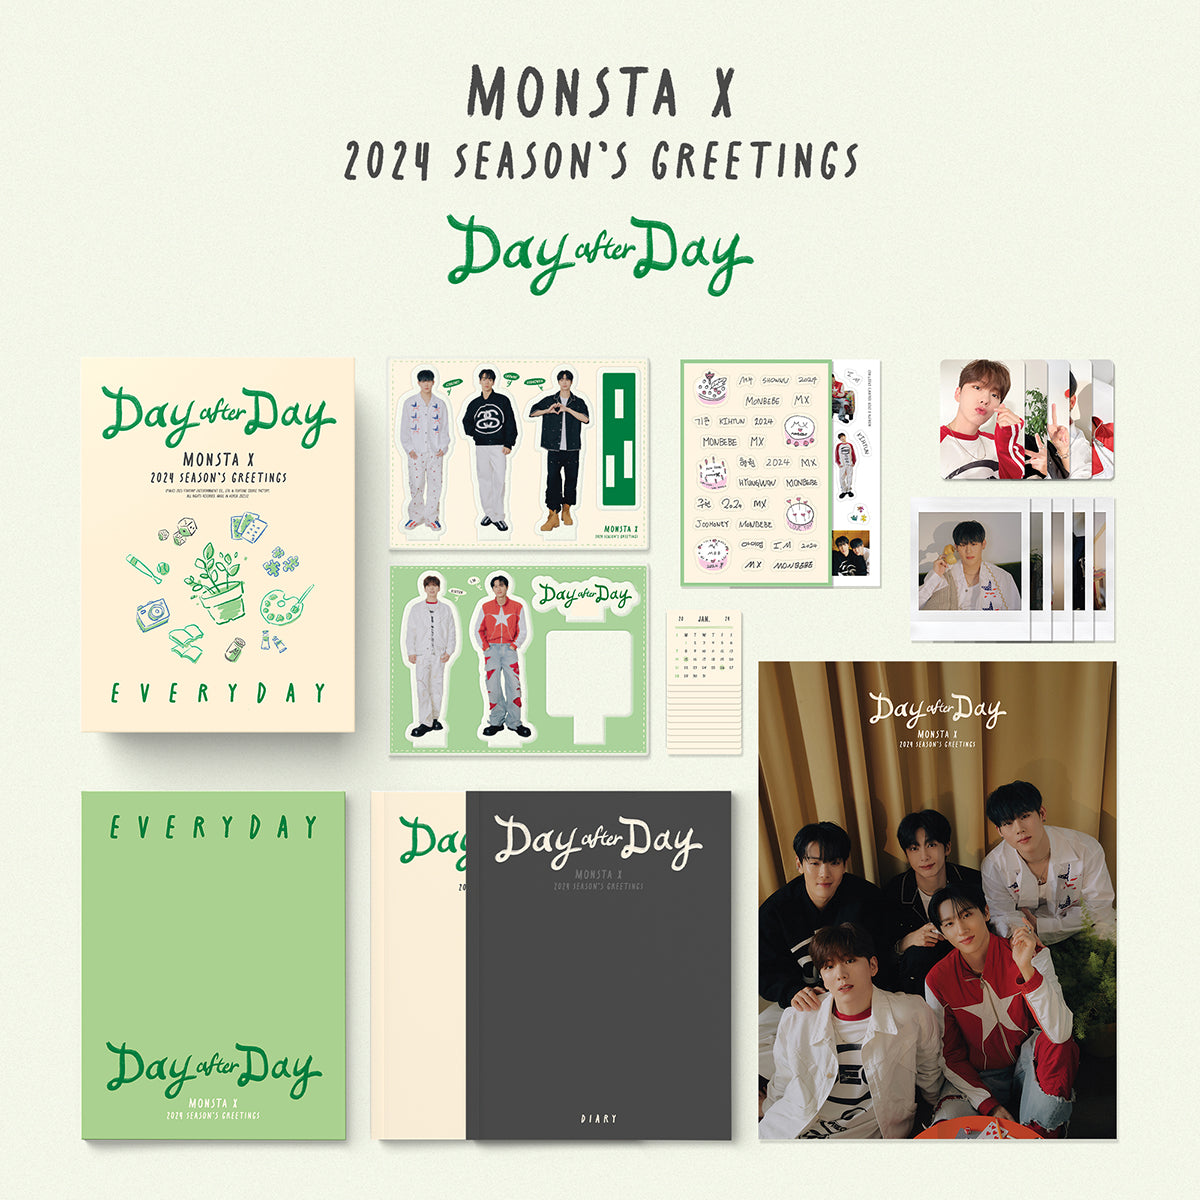 MONSTA X - 2024 SEASON'S GREETINGS [Day after Day] (EVERYDAY ver.)